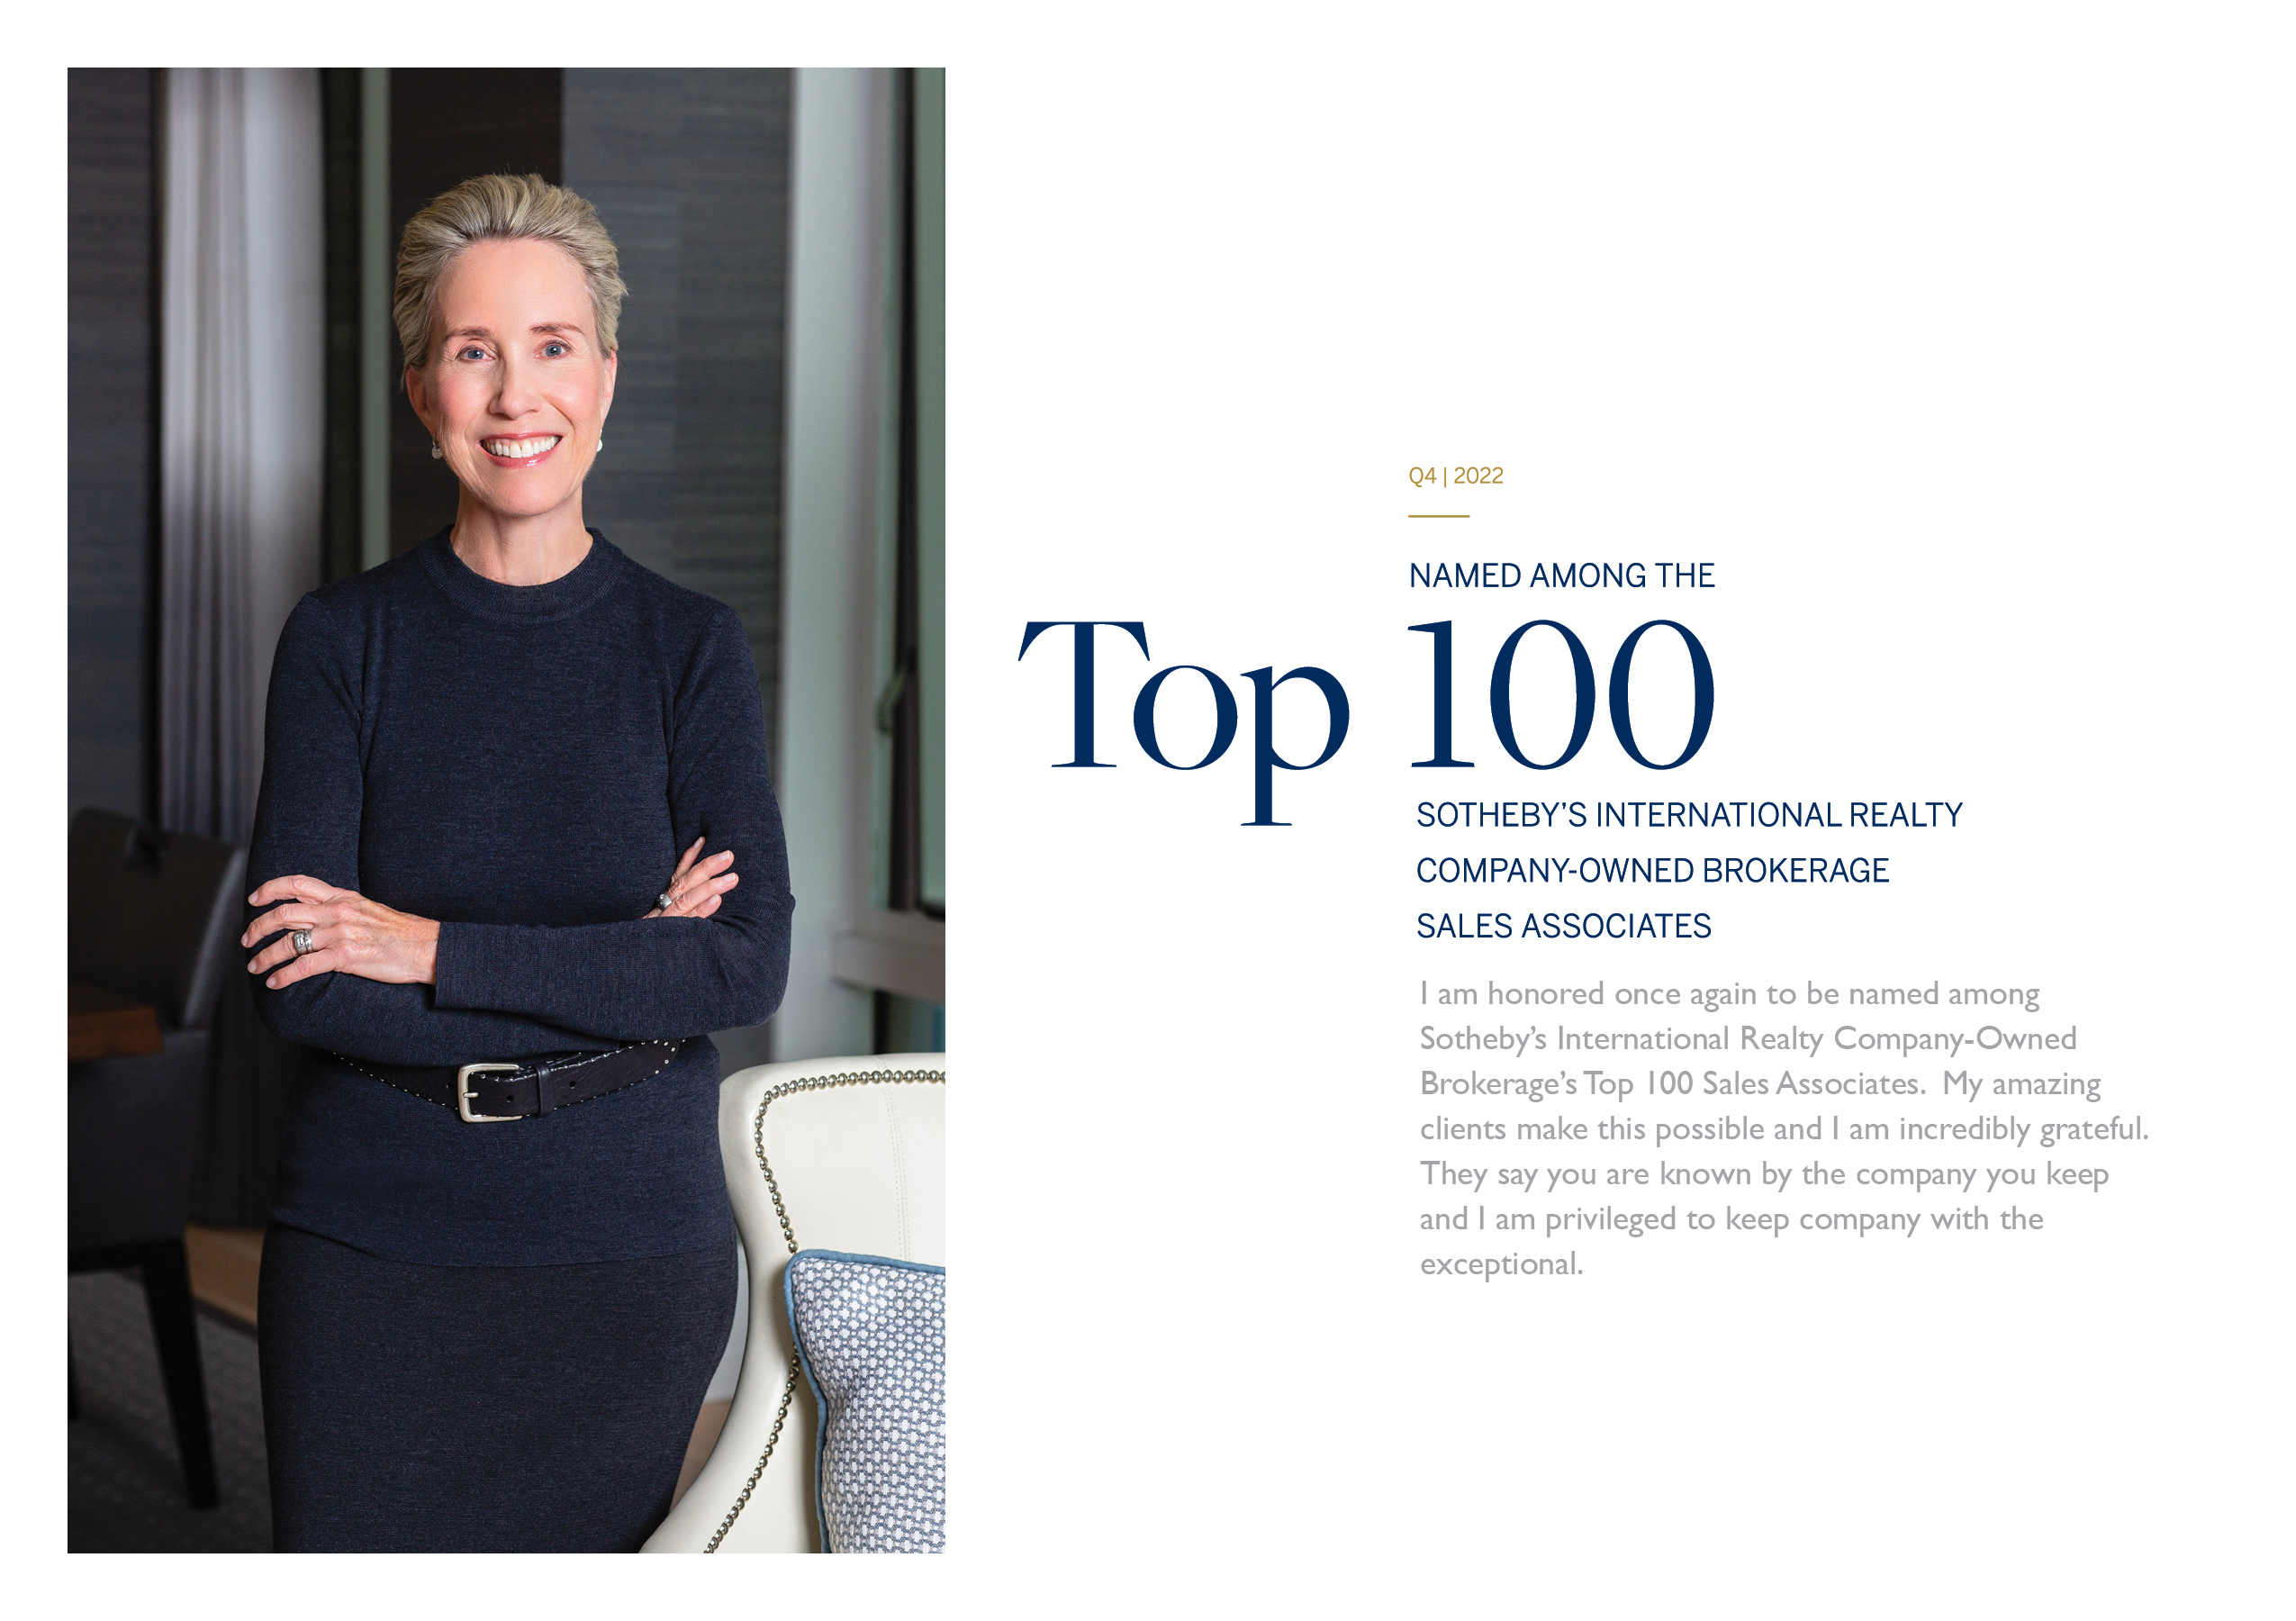 Rebecca named to Sotheby's "Top 100" for Q4 | 2022